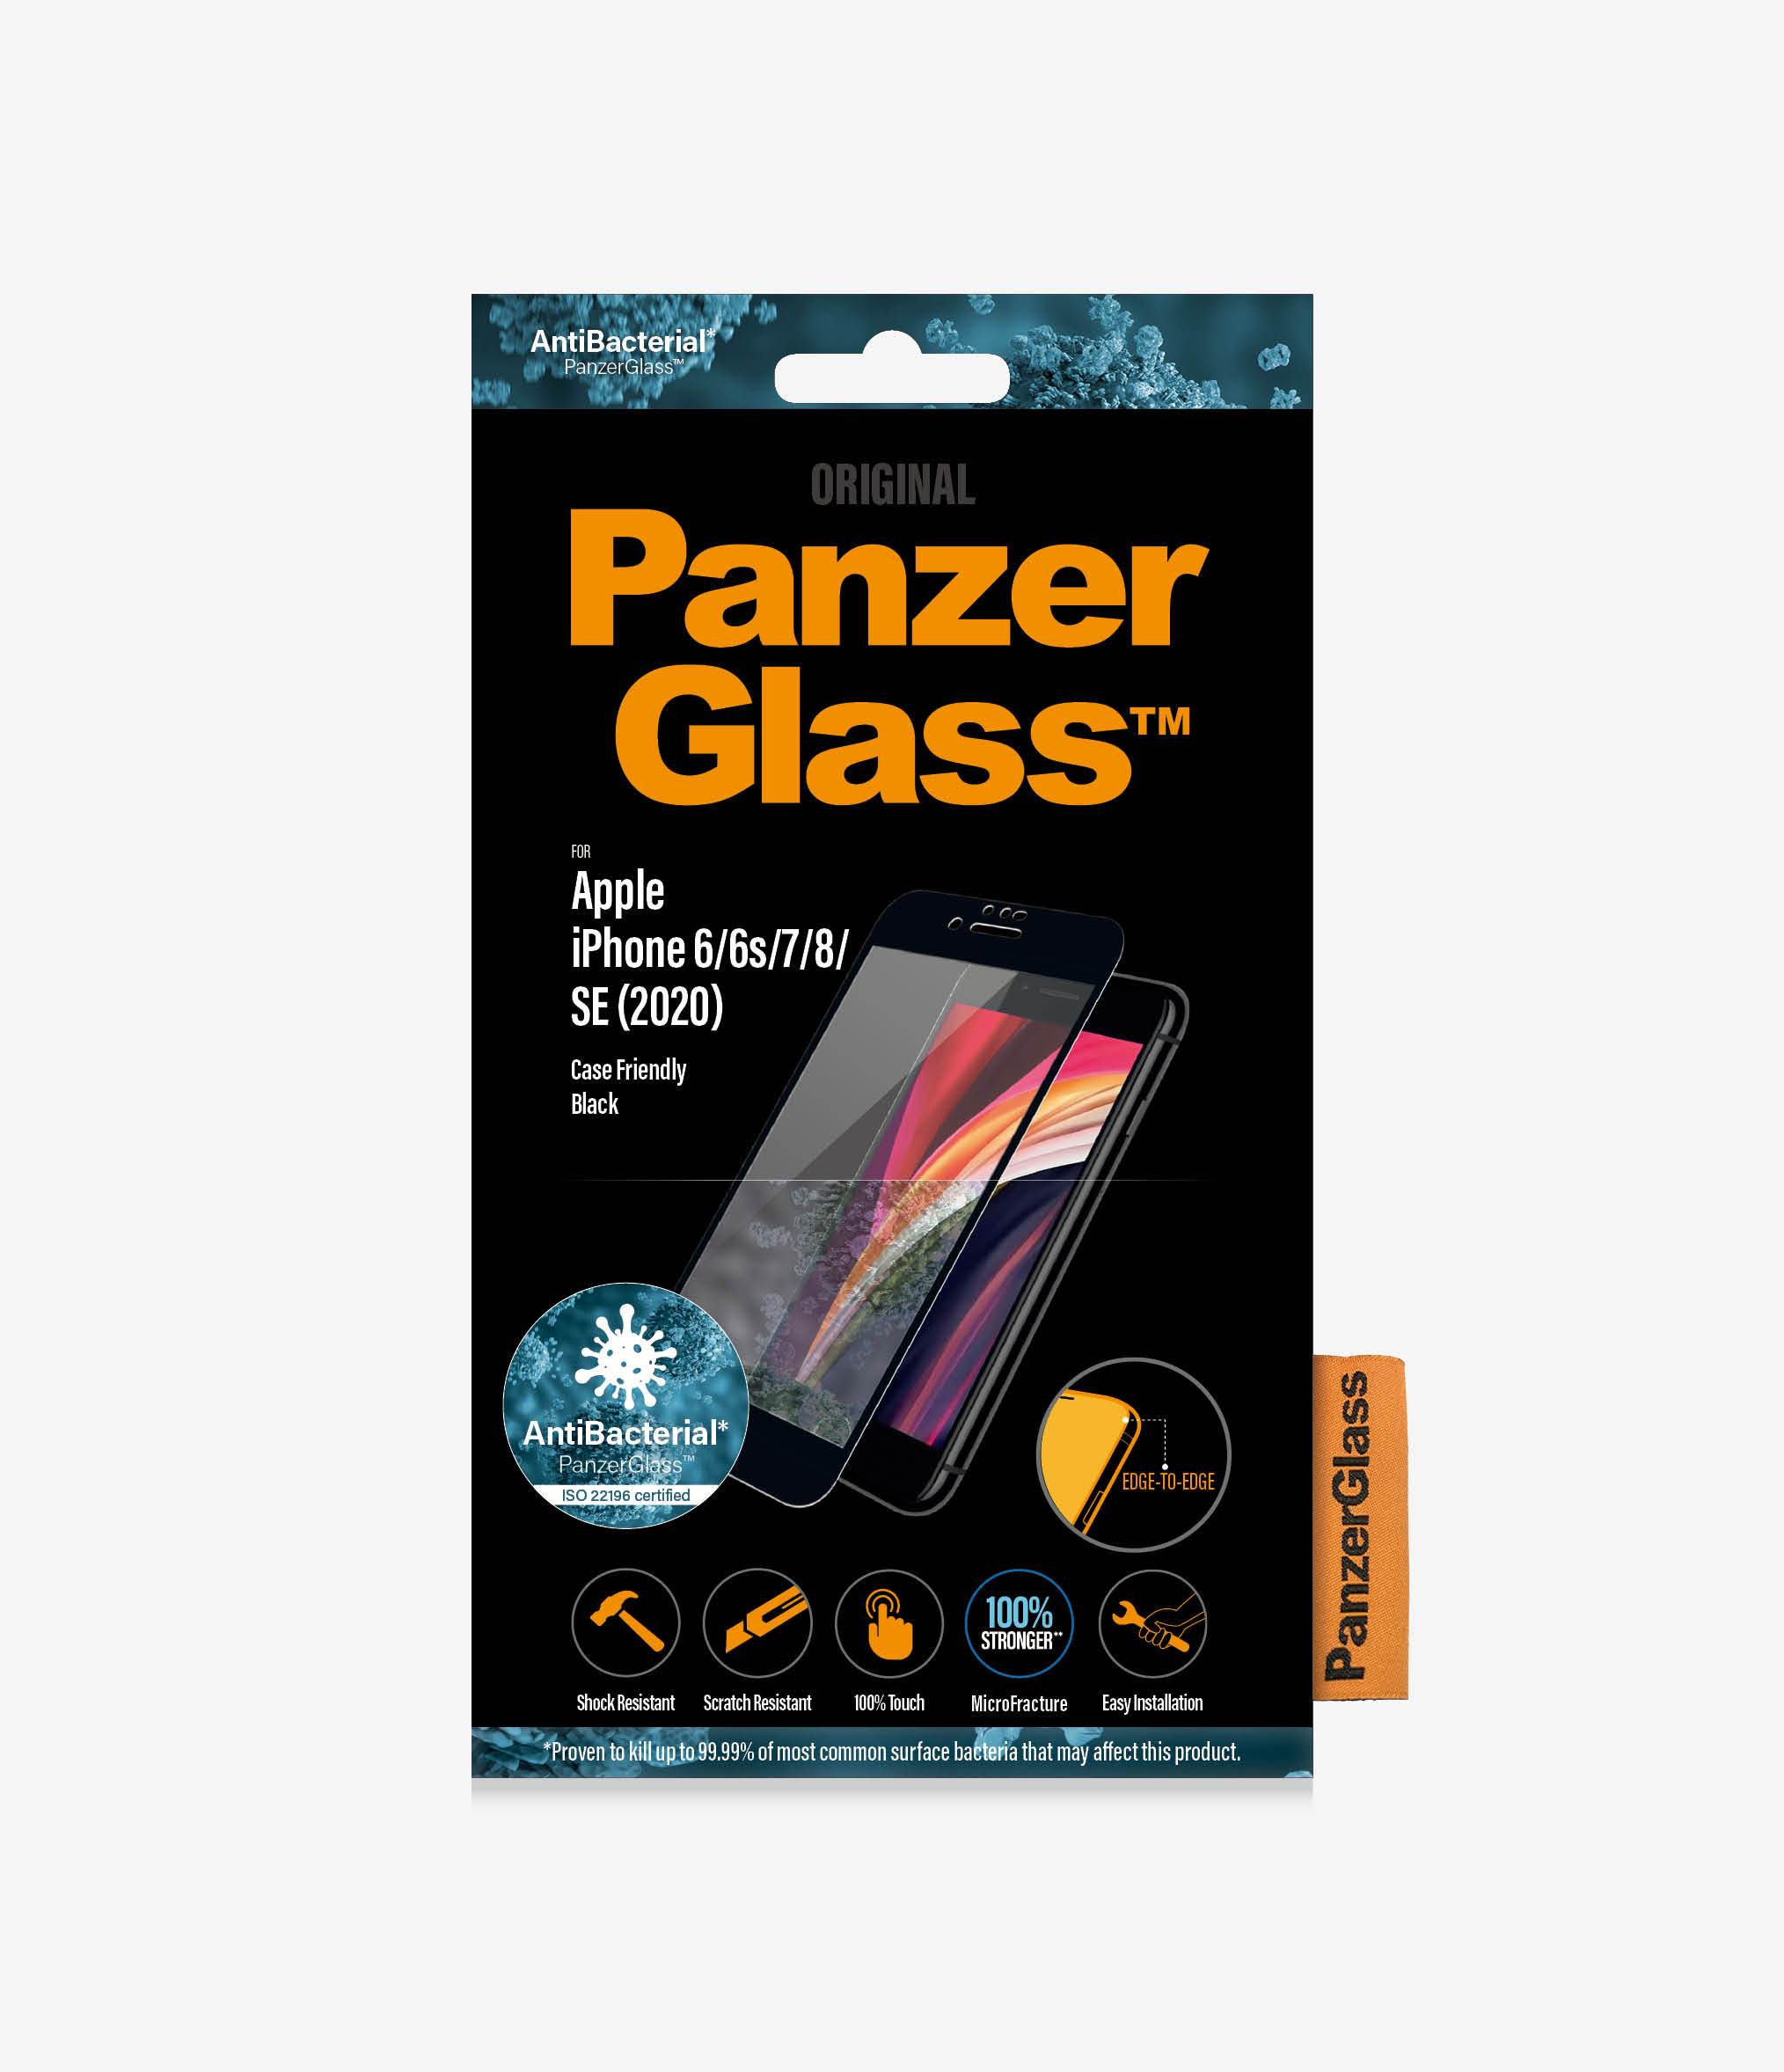 PanzerGlass™ Apple iPhone 6/6s/7/8/SE (2020) - Black - Clear glass (2679) - Screen Protector - 100% touch preservation, Rounded edges, Crystal clear